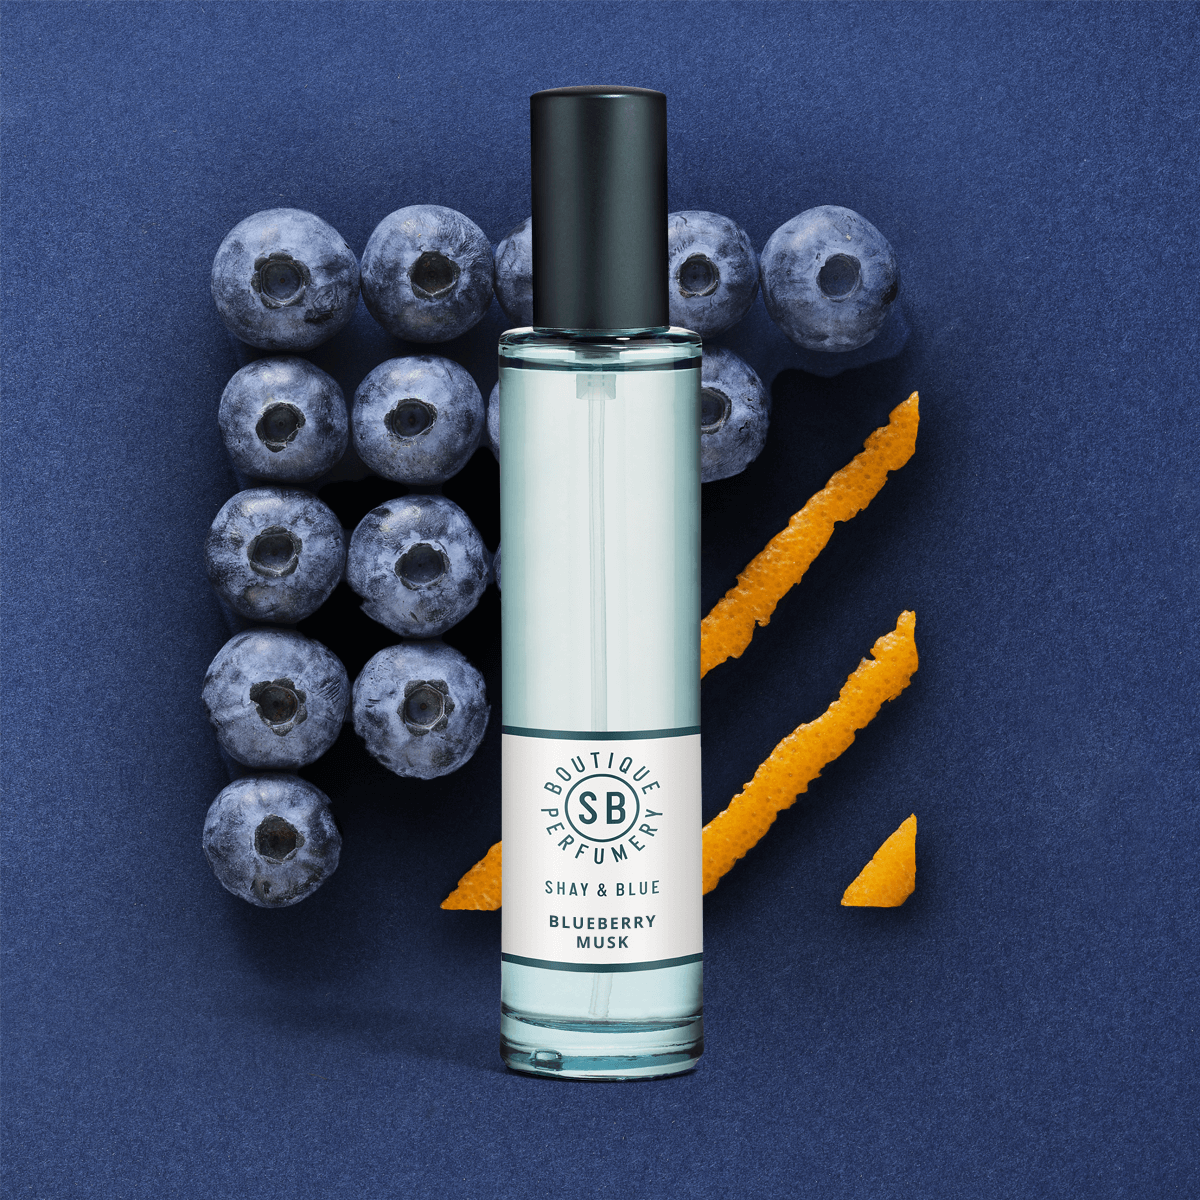 Blueberry Musk Fragrance 30ml | Soft blueberry & orange blossom fused with magnolia and silky cashmere. | Clean All Gender Fragrance | Shay & Blue